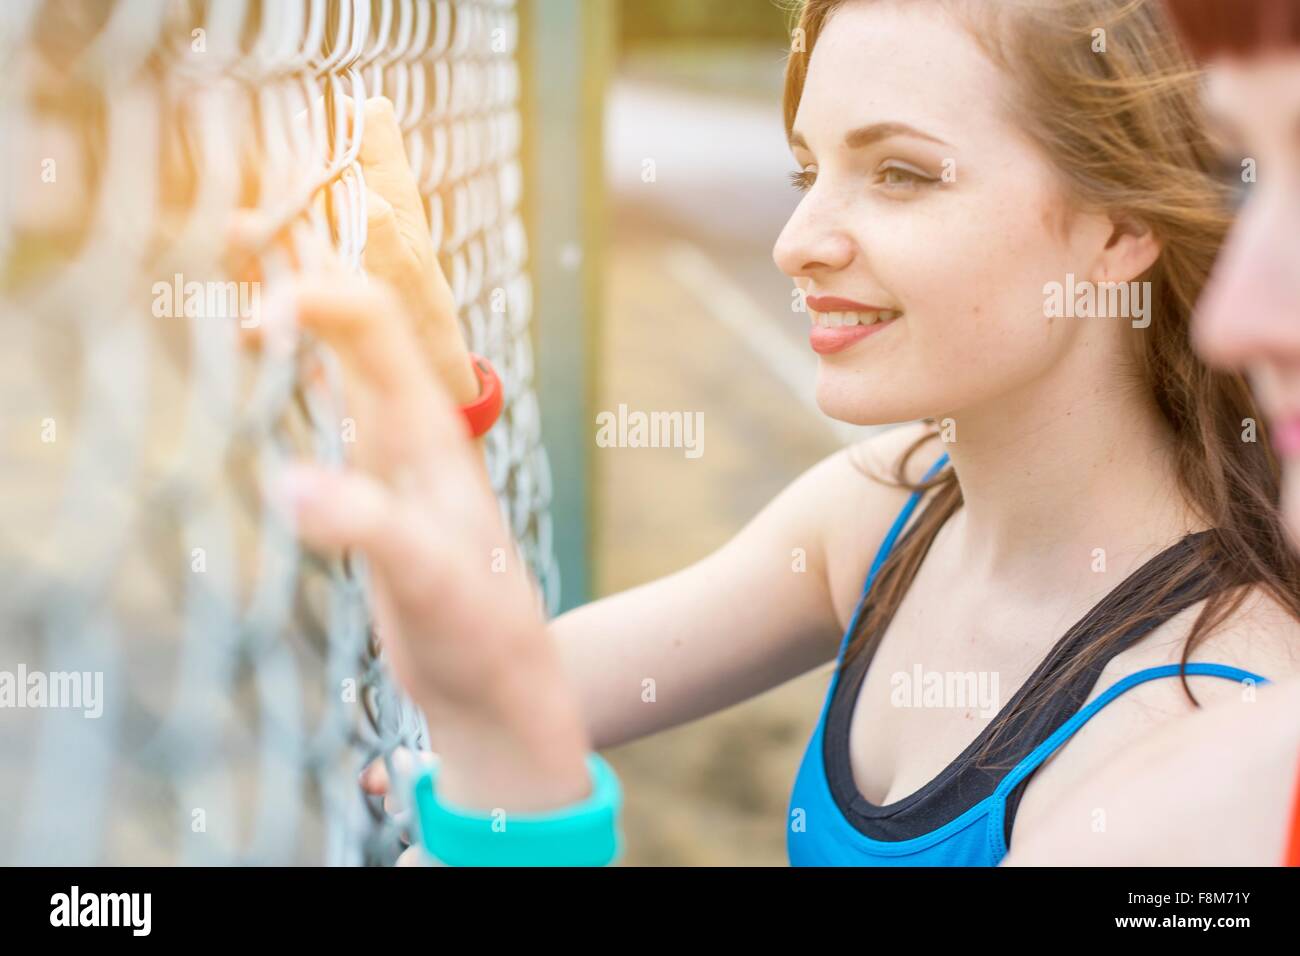 Young women standing beside fence Stock Photo